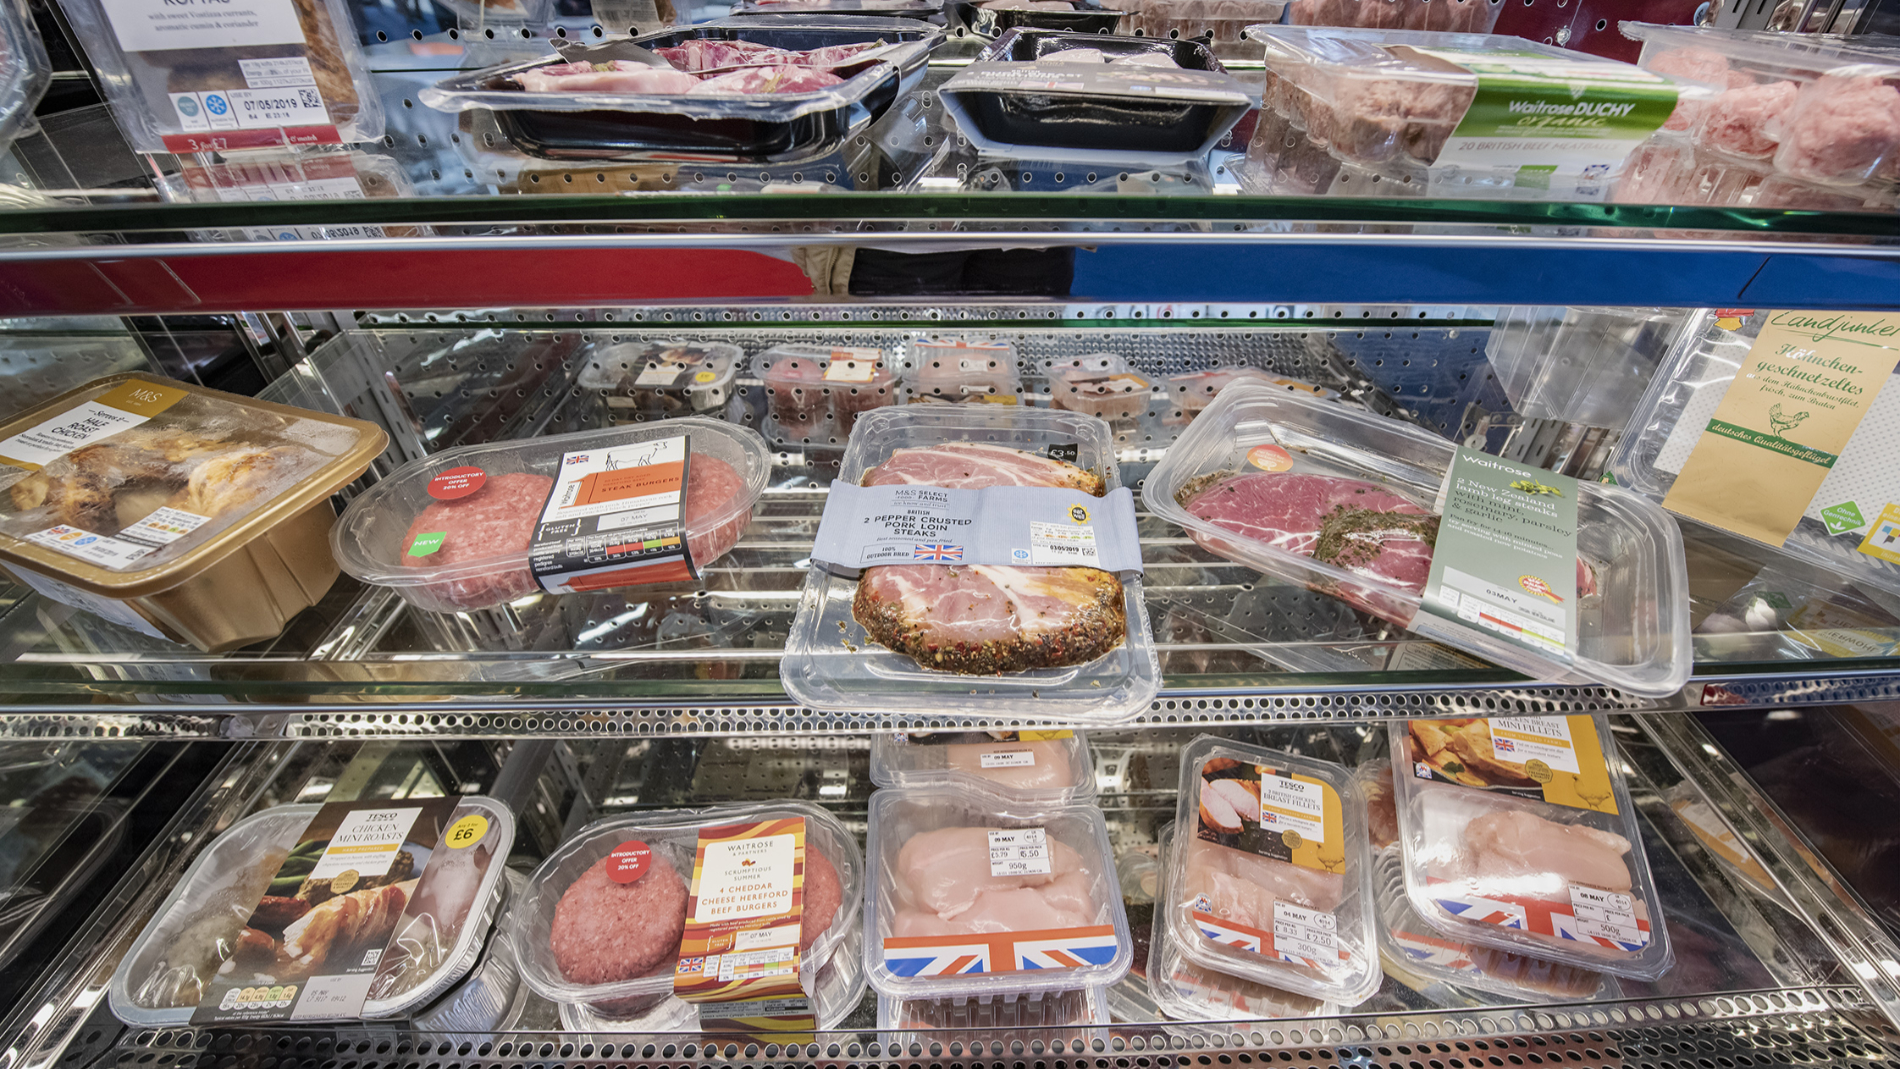 Packaged meat and sausage products